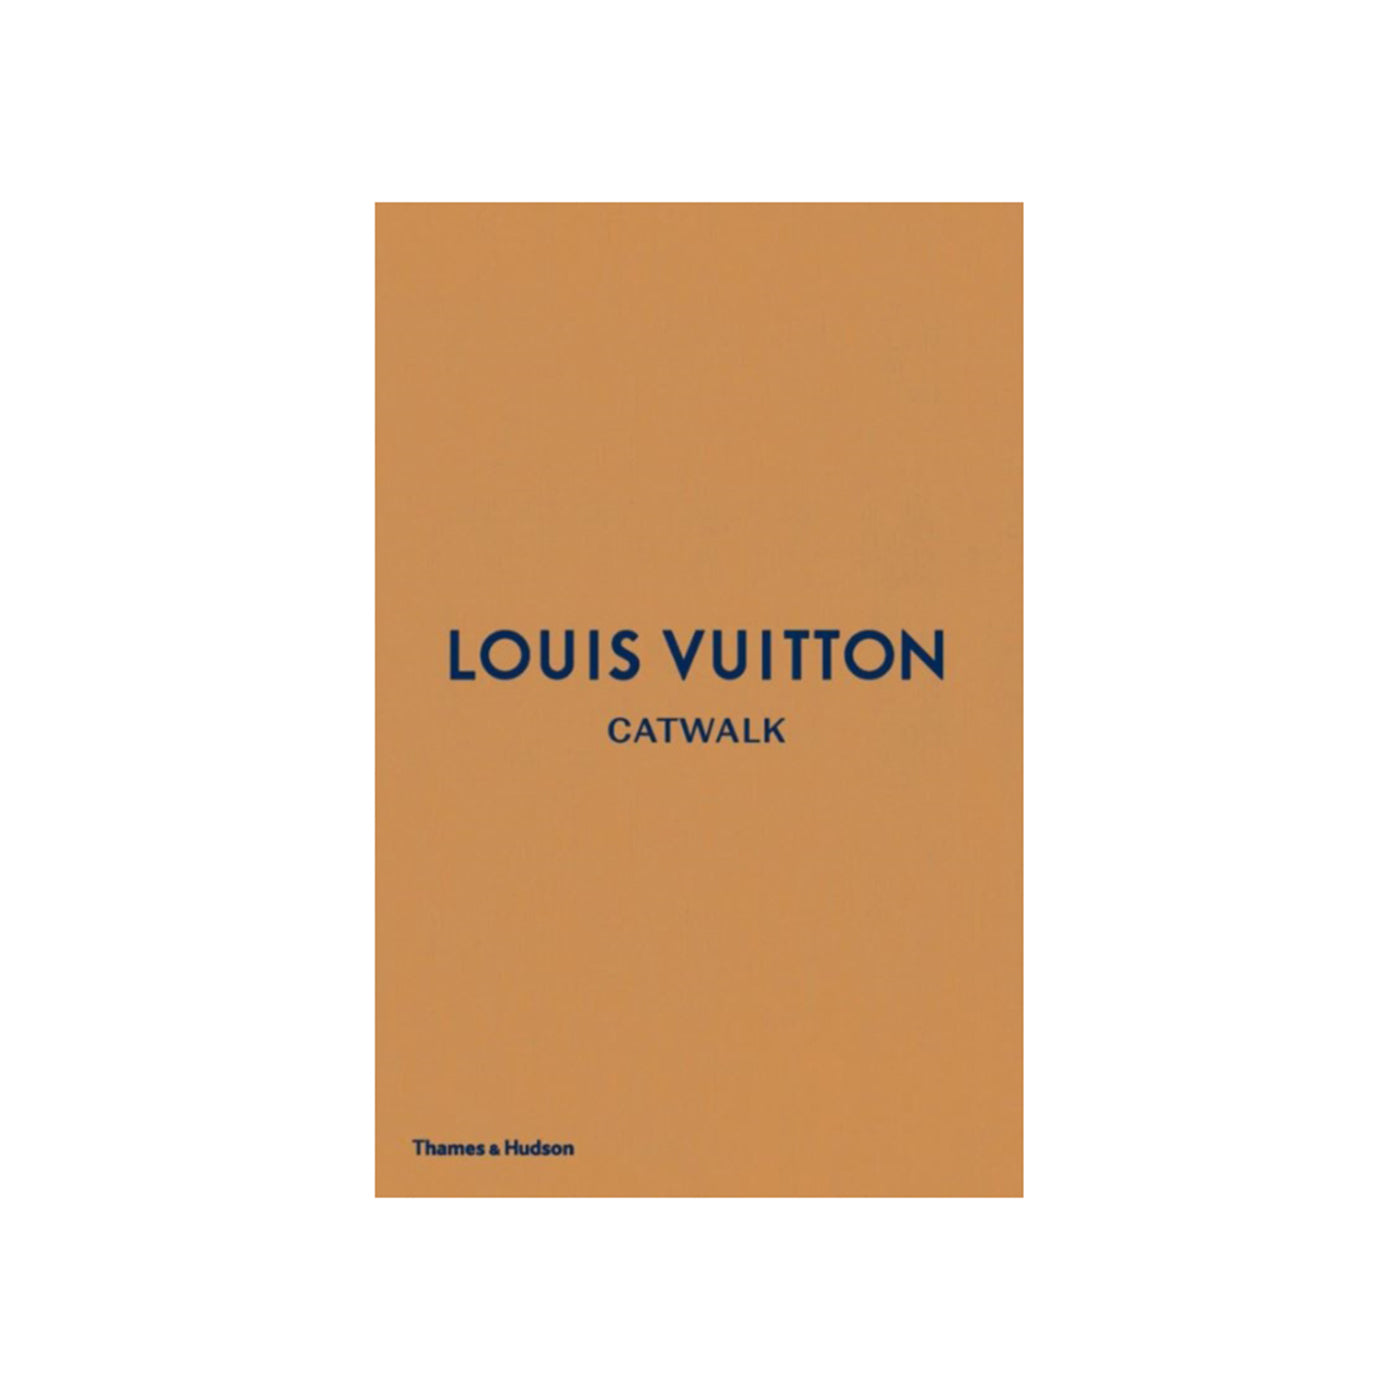 A book of 1,350 Louis Vuitton catwalk photographs is being released